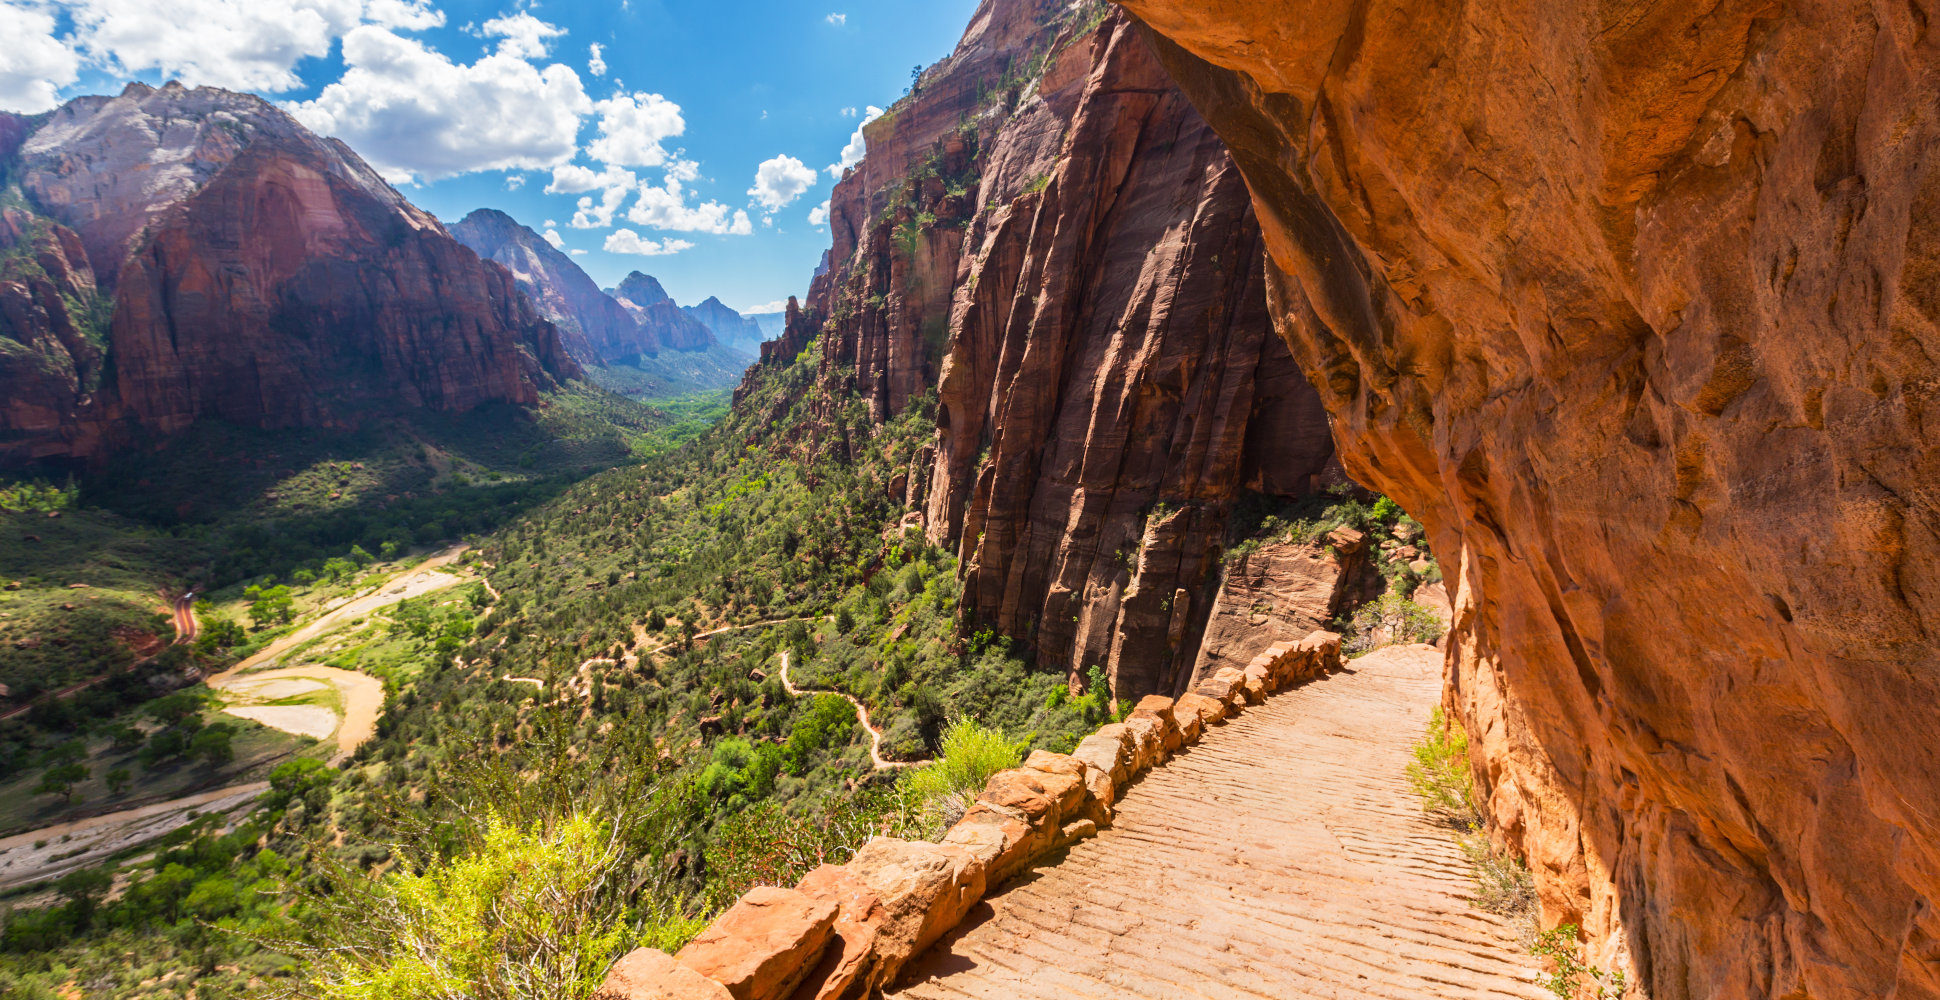 Hiking Trail, Zion National Park